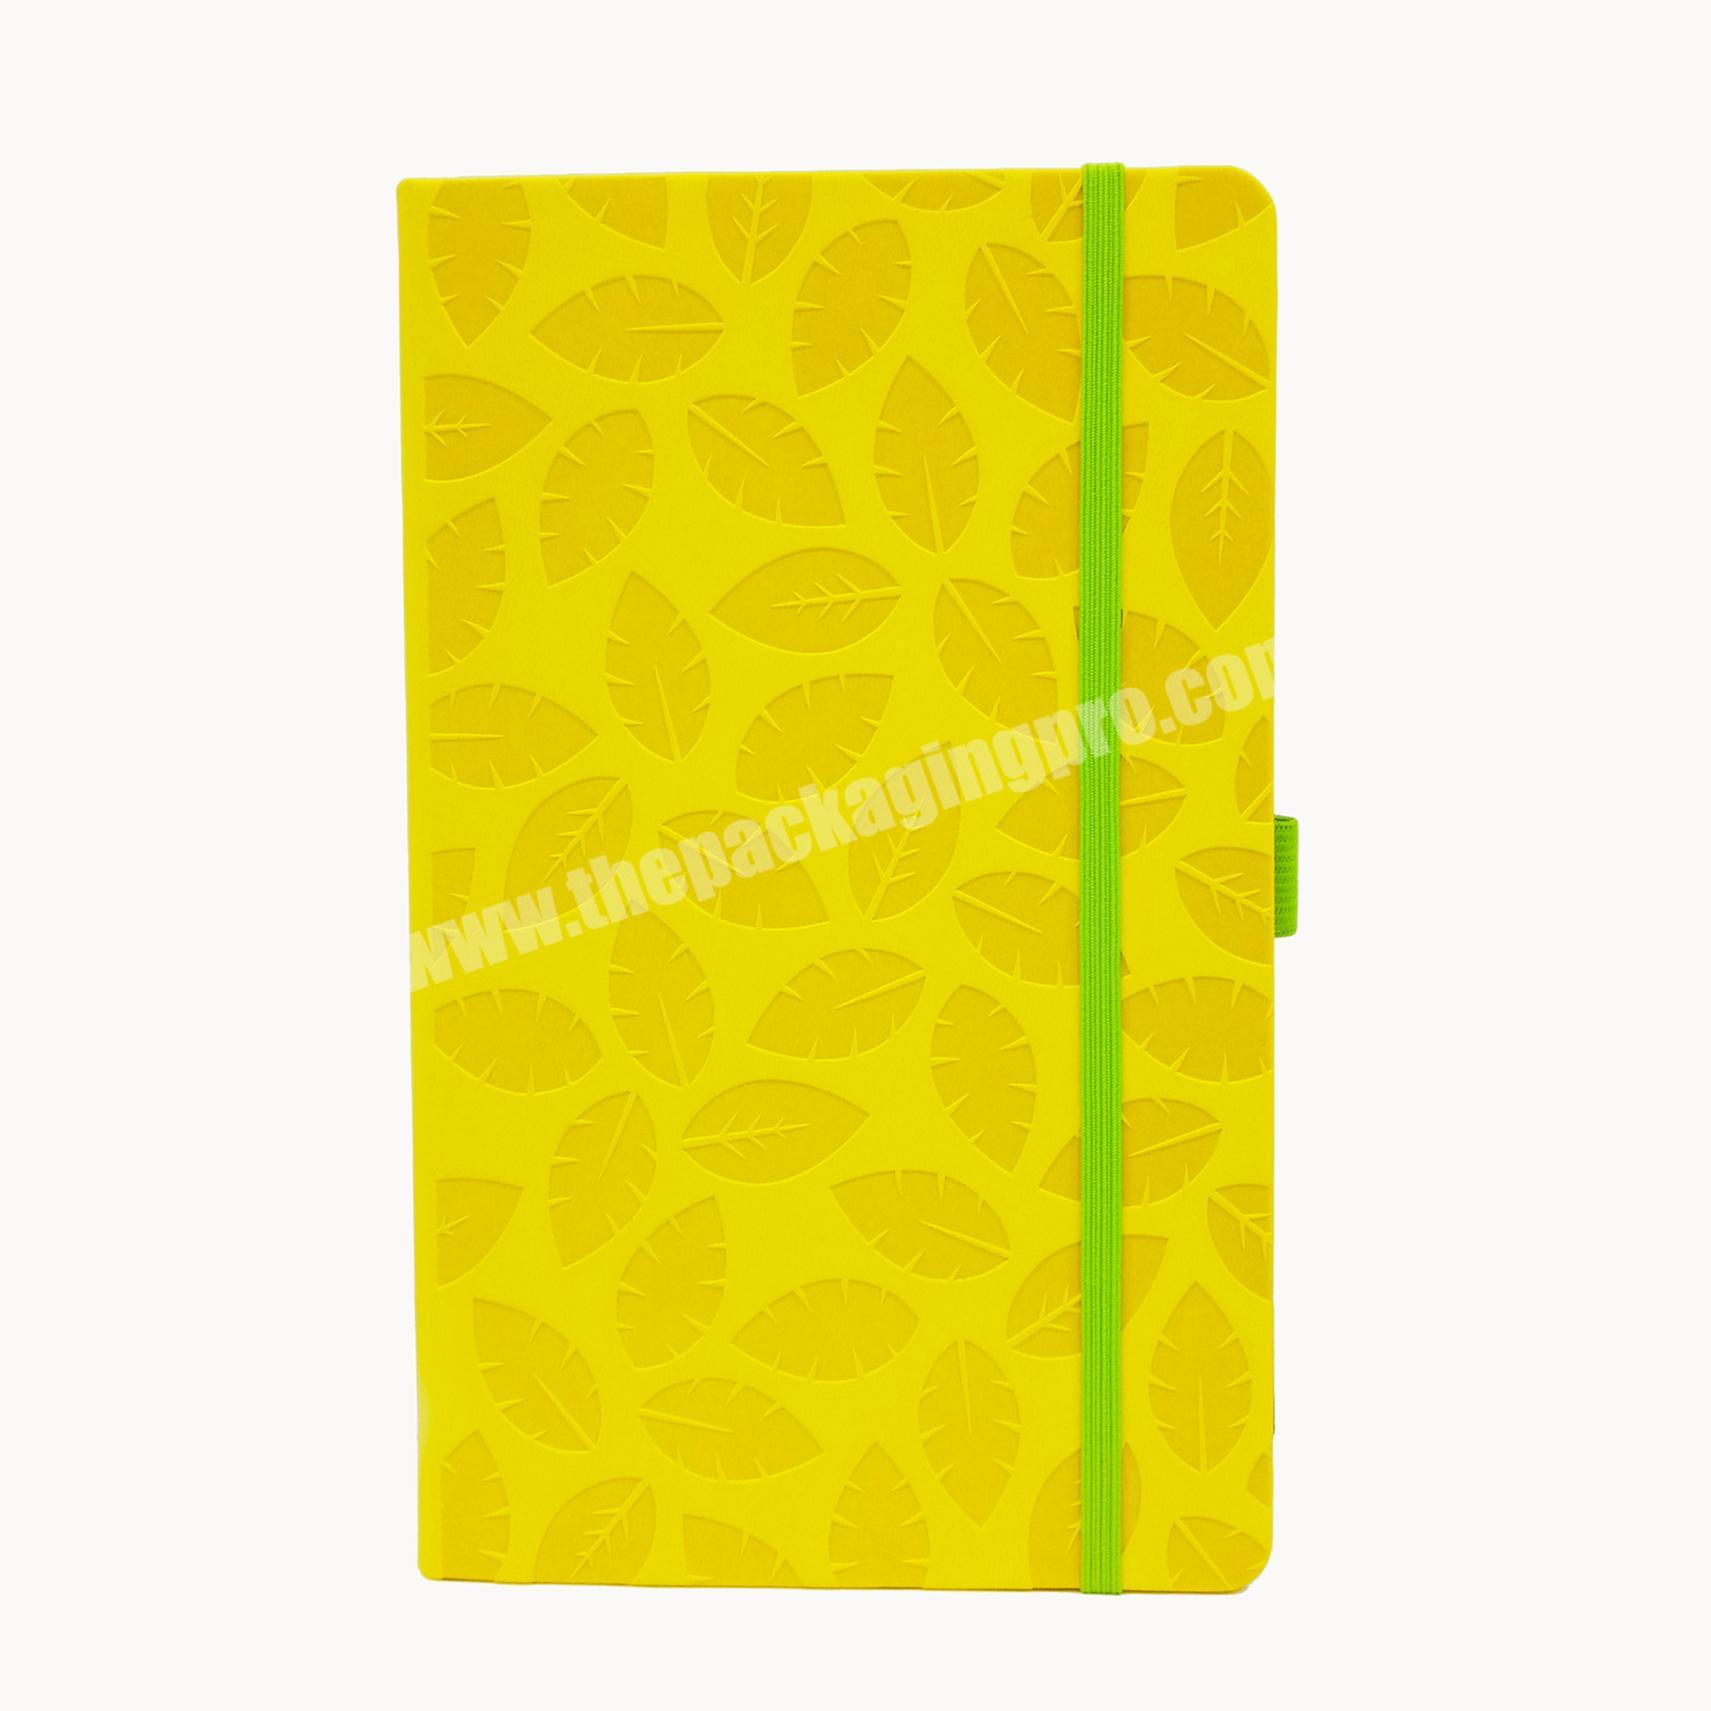 High quality lifestyle planner personal diary promotional notebook leather cover journal